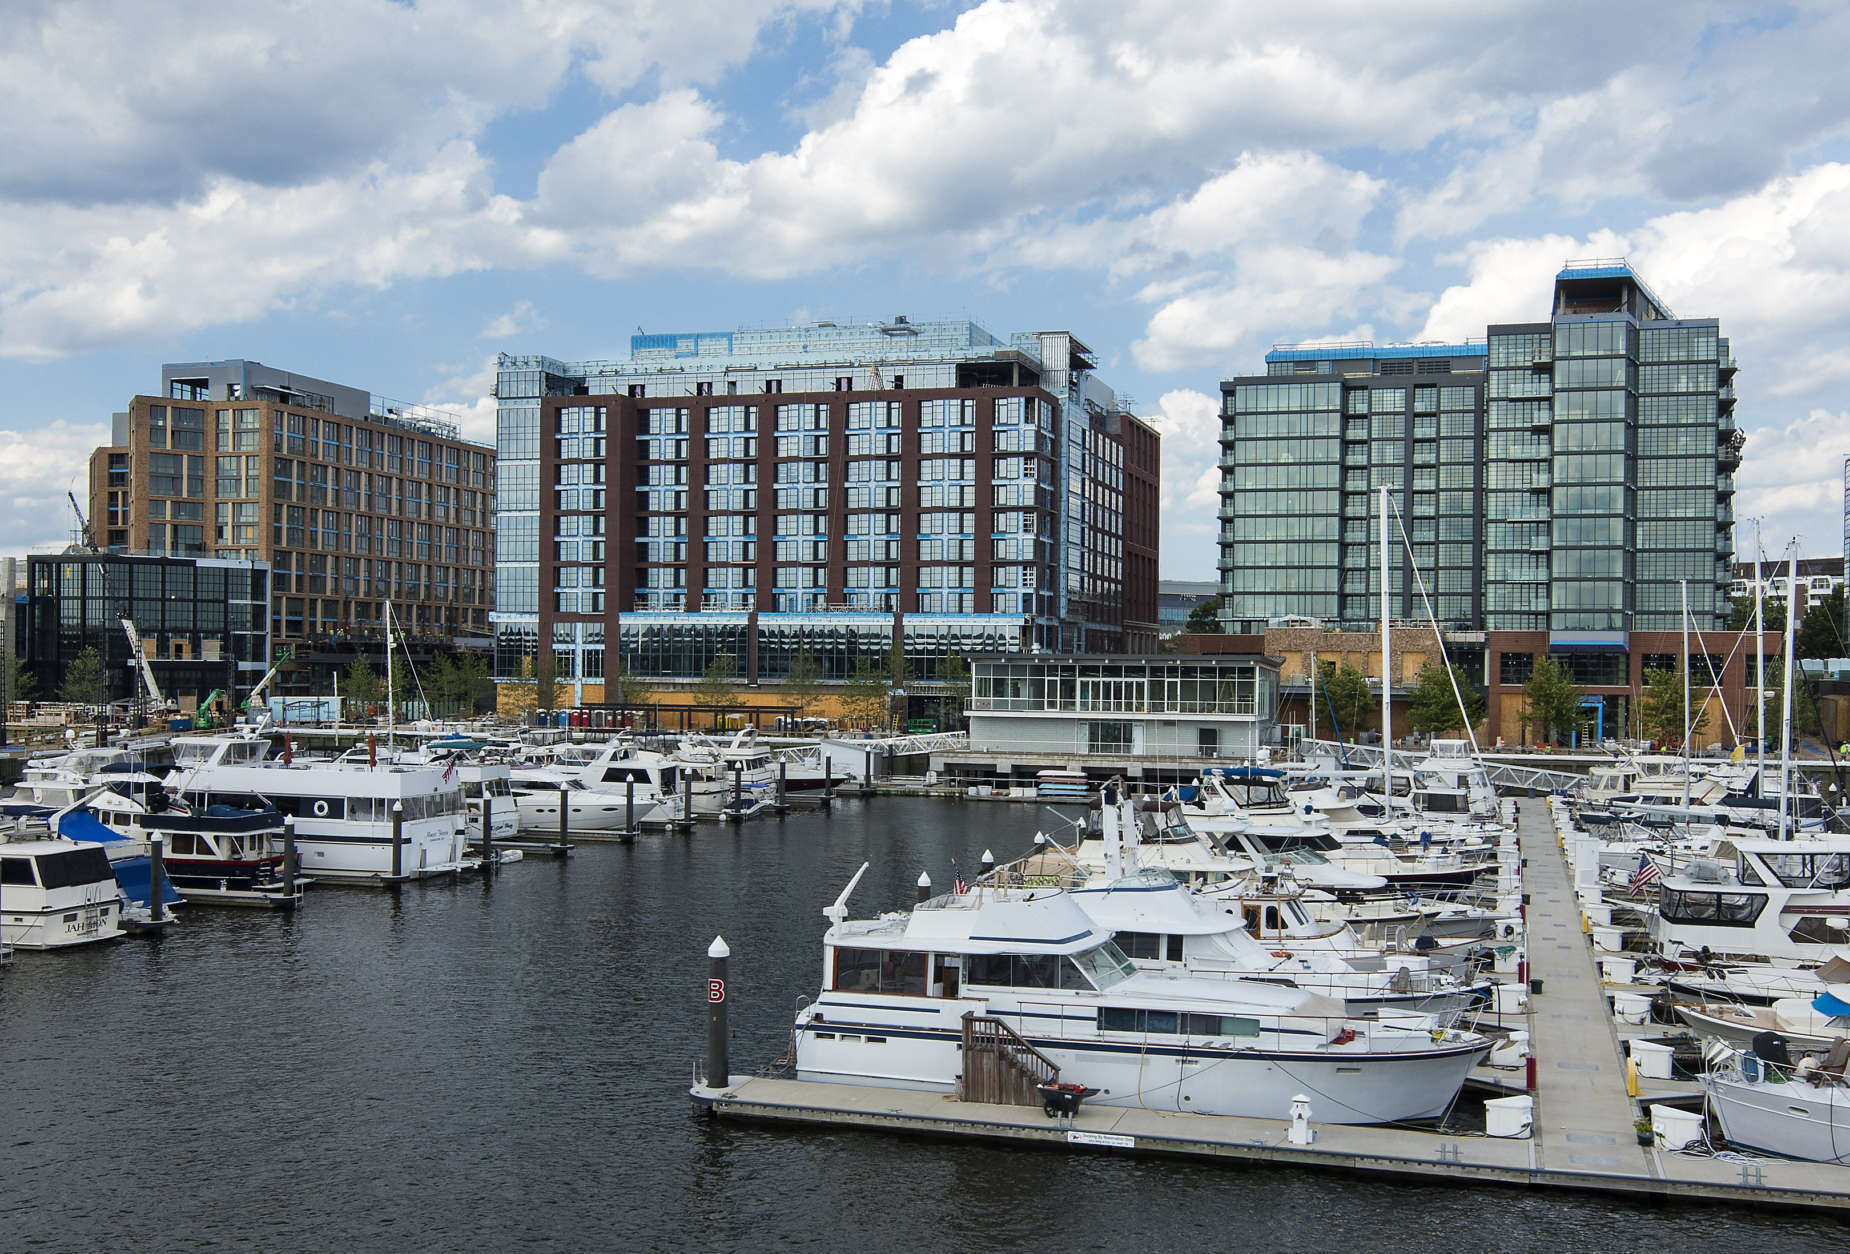 A view of the 309-slip marina and yacht club at The Warf. The D.C. project has revitalized a mile of shore along the Southwest Waterfront. More than 2,000 people are expected to live there and thousands more will work in shops, storefronts and office space. (Matthew Borkoski/PN Hoffman)